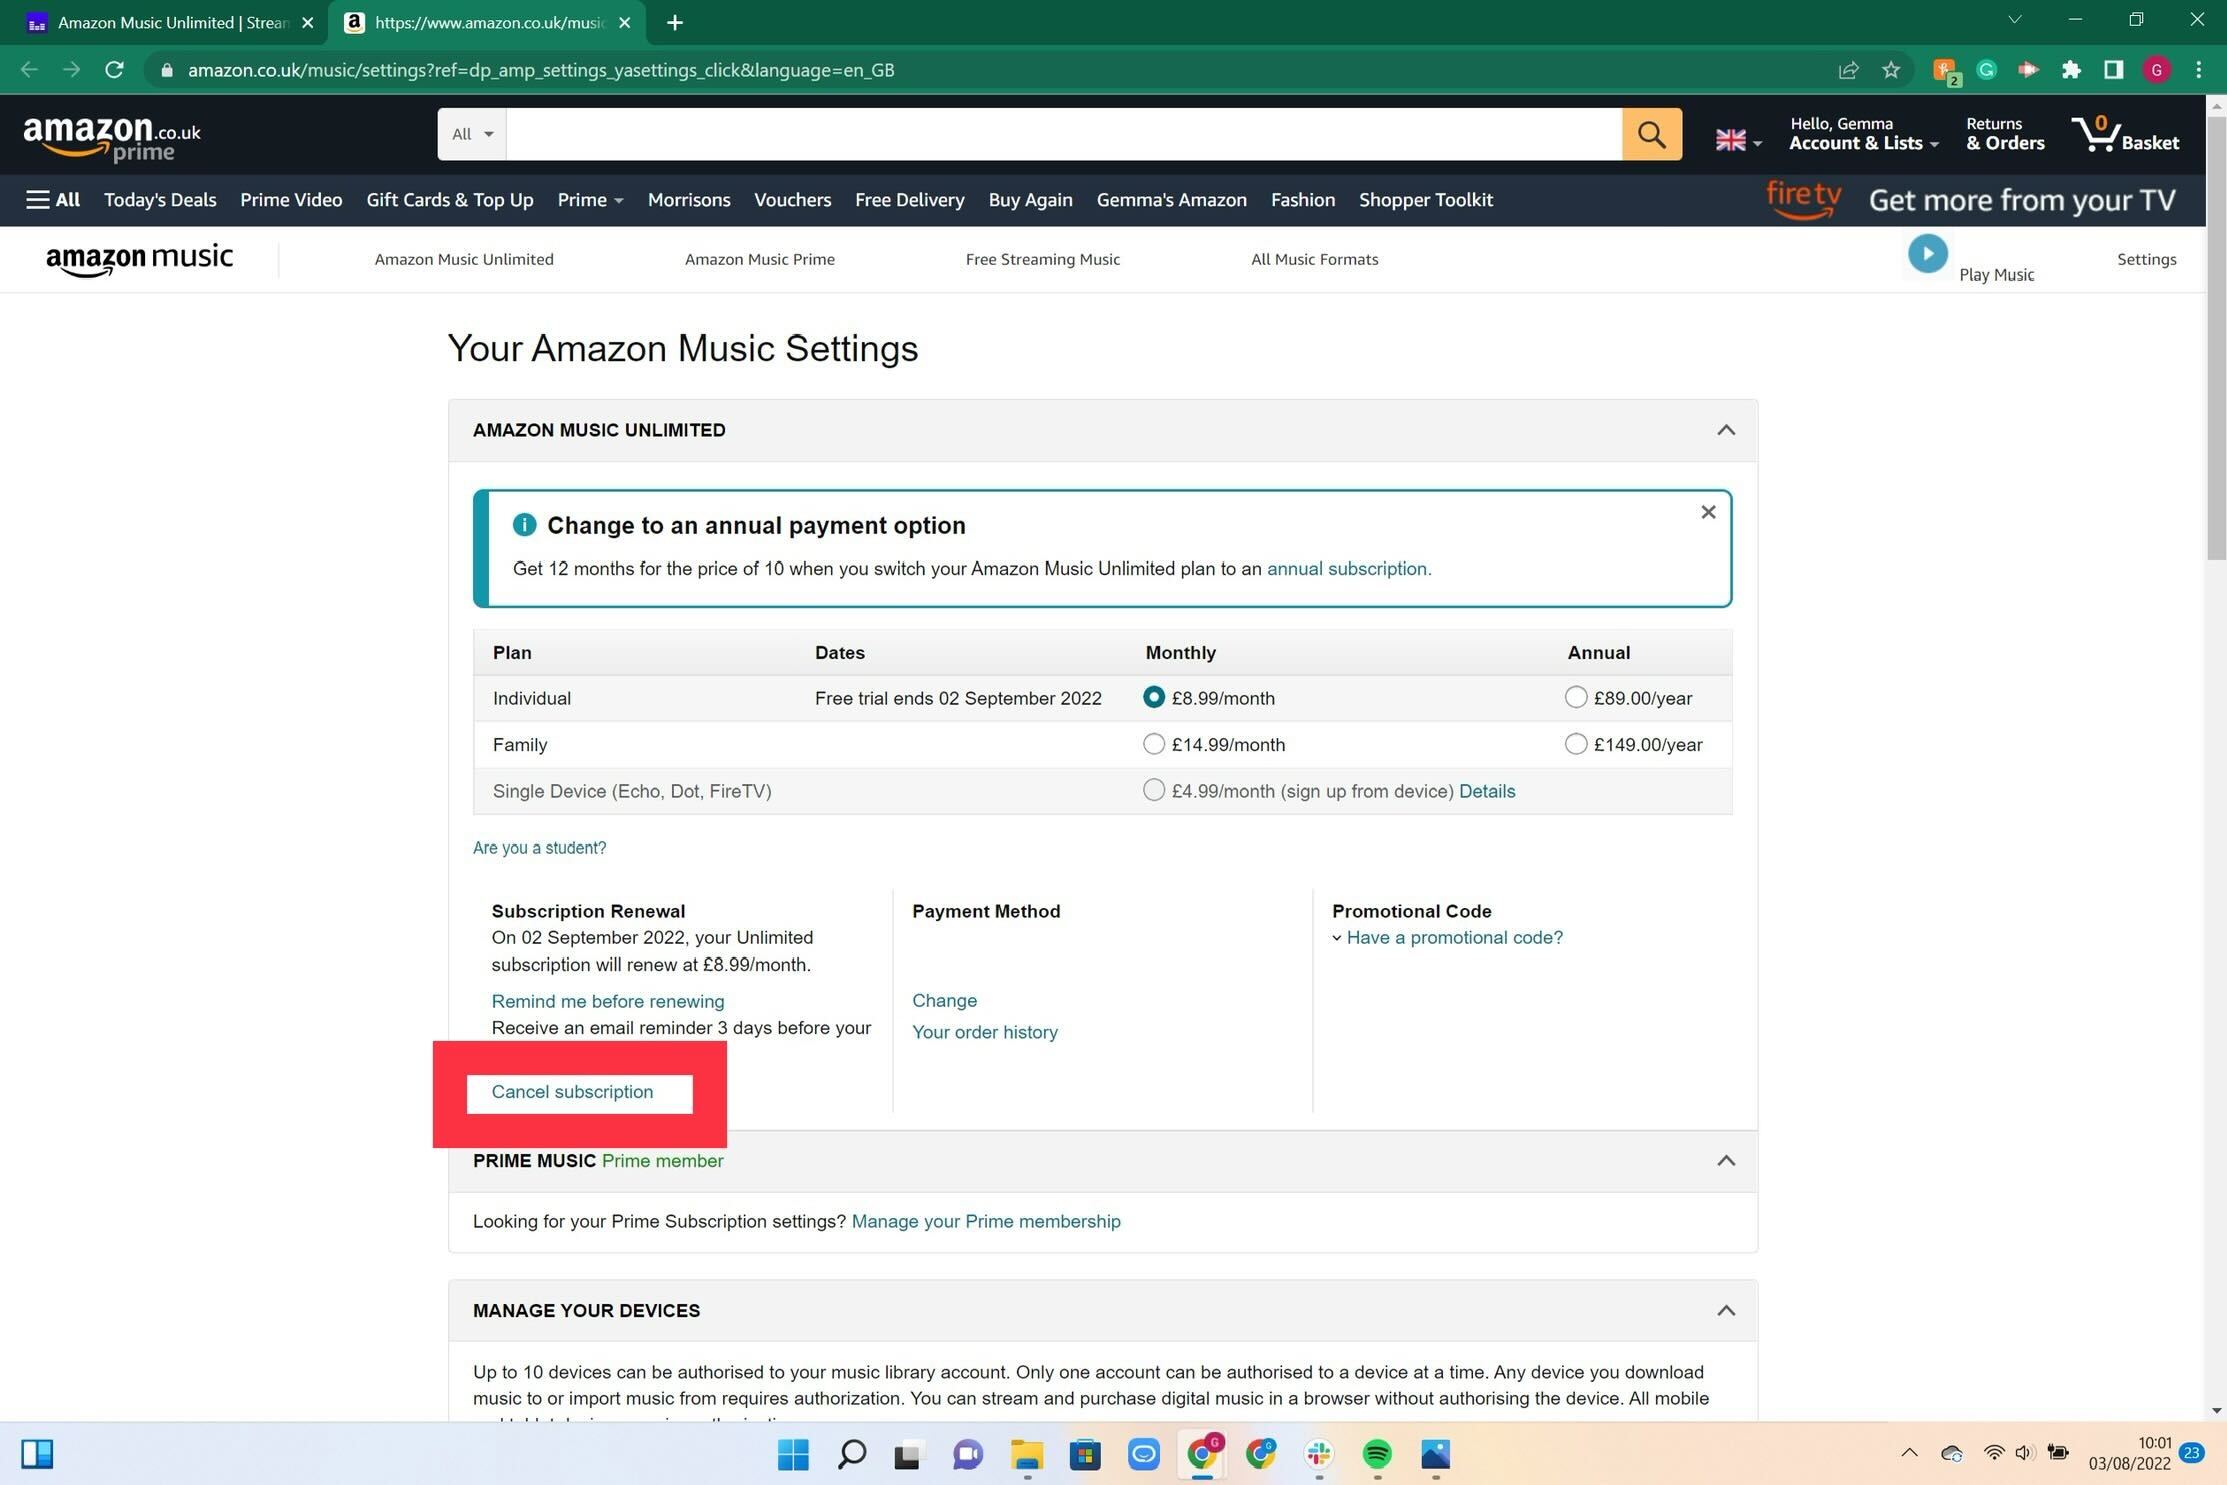 The billing options on Amazon Music Unlimited